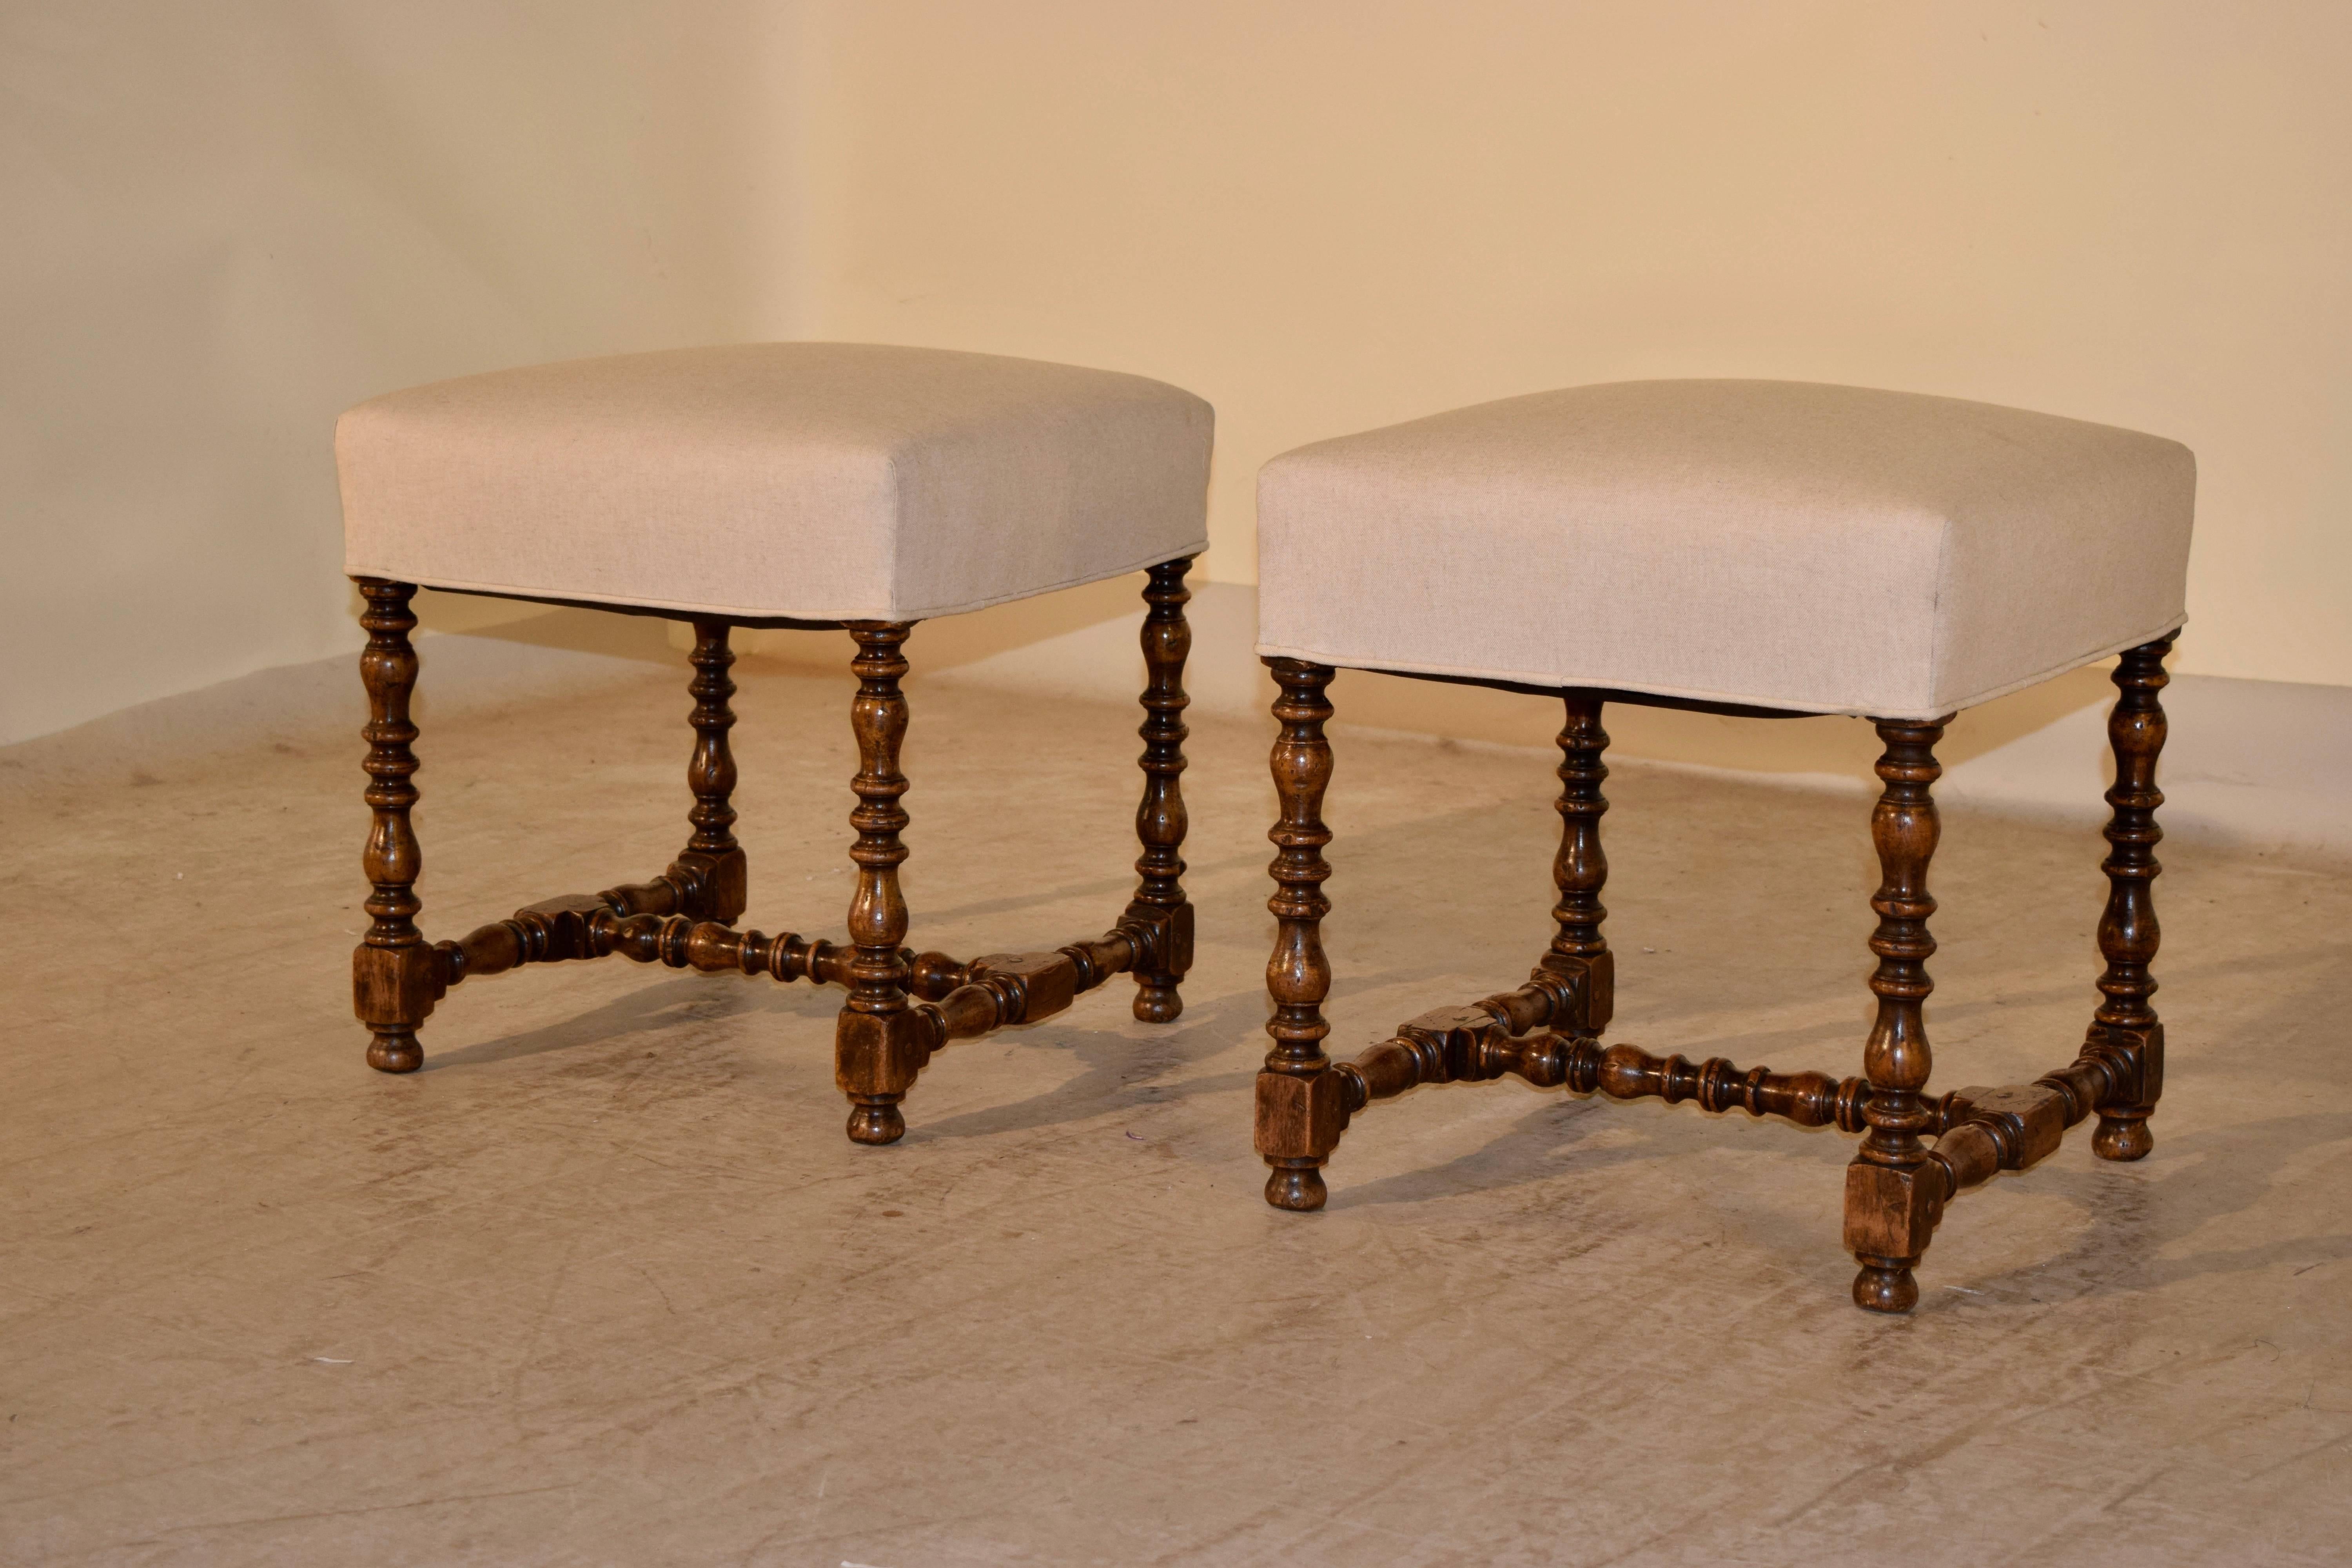 19th century pair of French stools made from walnut. The seats have been newly upholstered in linen and finished with a single welt. The legs and cross stretcher are hand-turned.